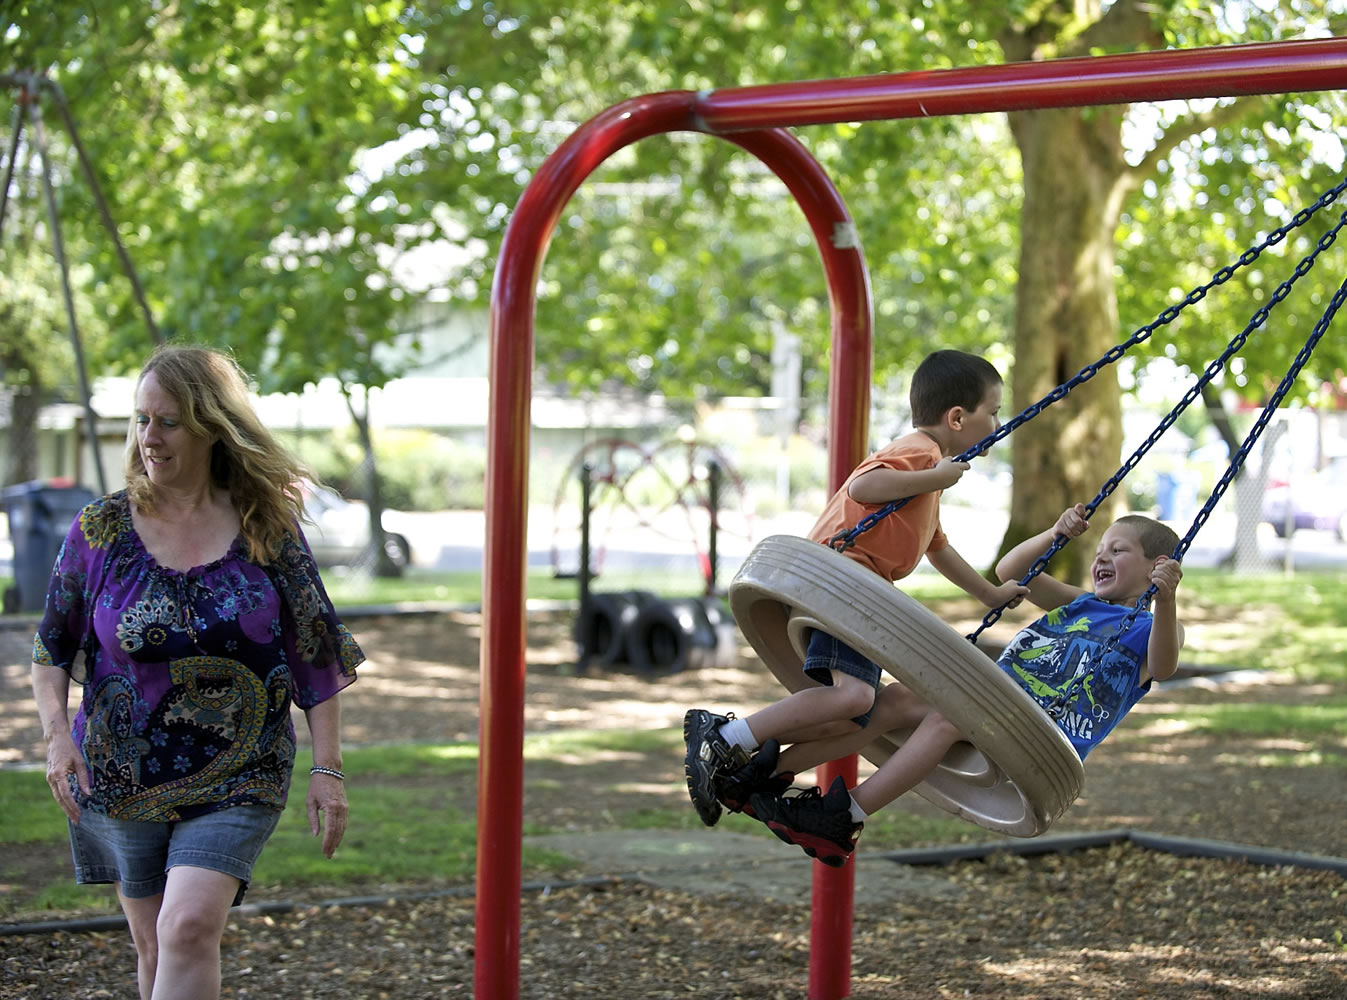 Lori Sanders, of Vancouver, gets out of the way after giving her grandchildren Landon, 5, left, and Elysia 7, a push on the tire swing at Crown Park in Camas on Tuesday July 8, 2014. Family Circle magazine named Camas as one of the 10 best cities in America for families.